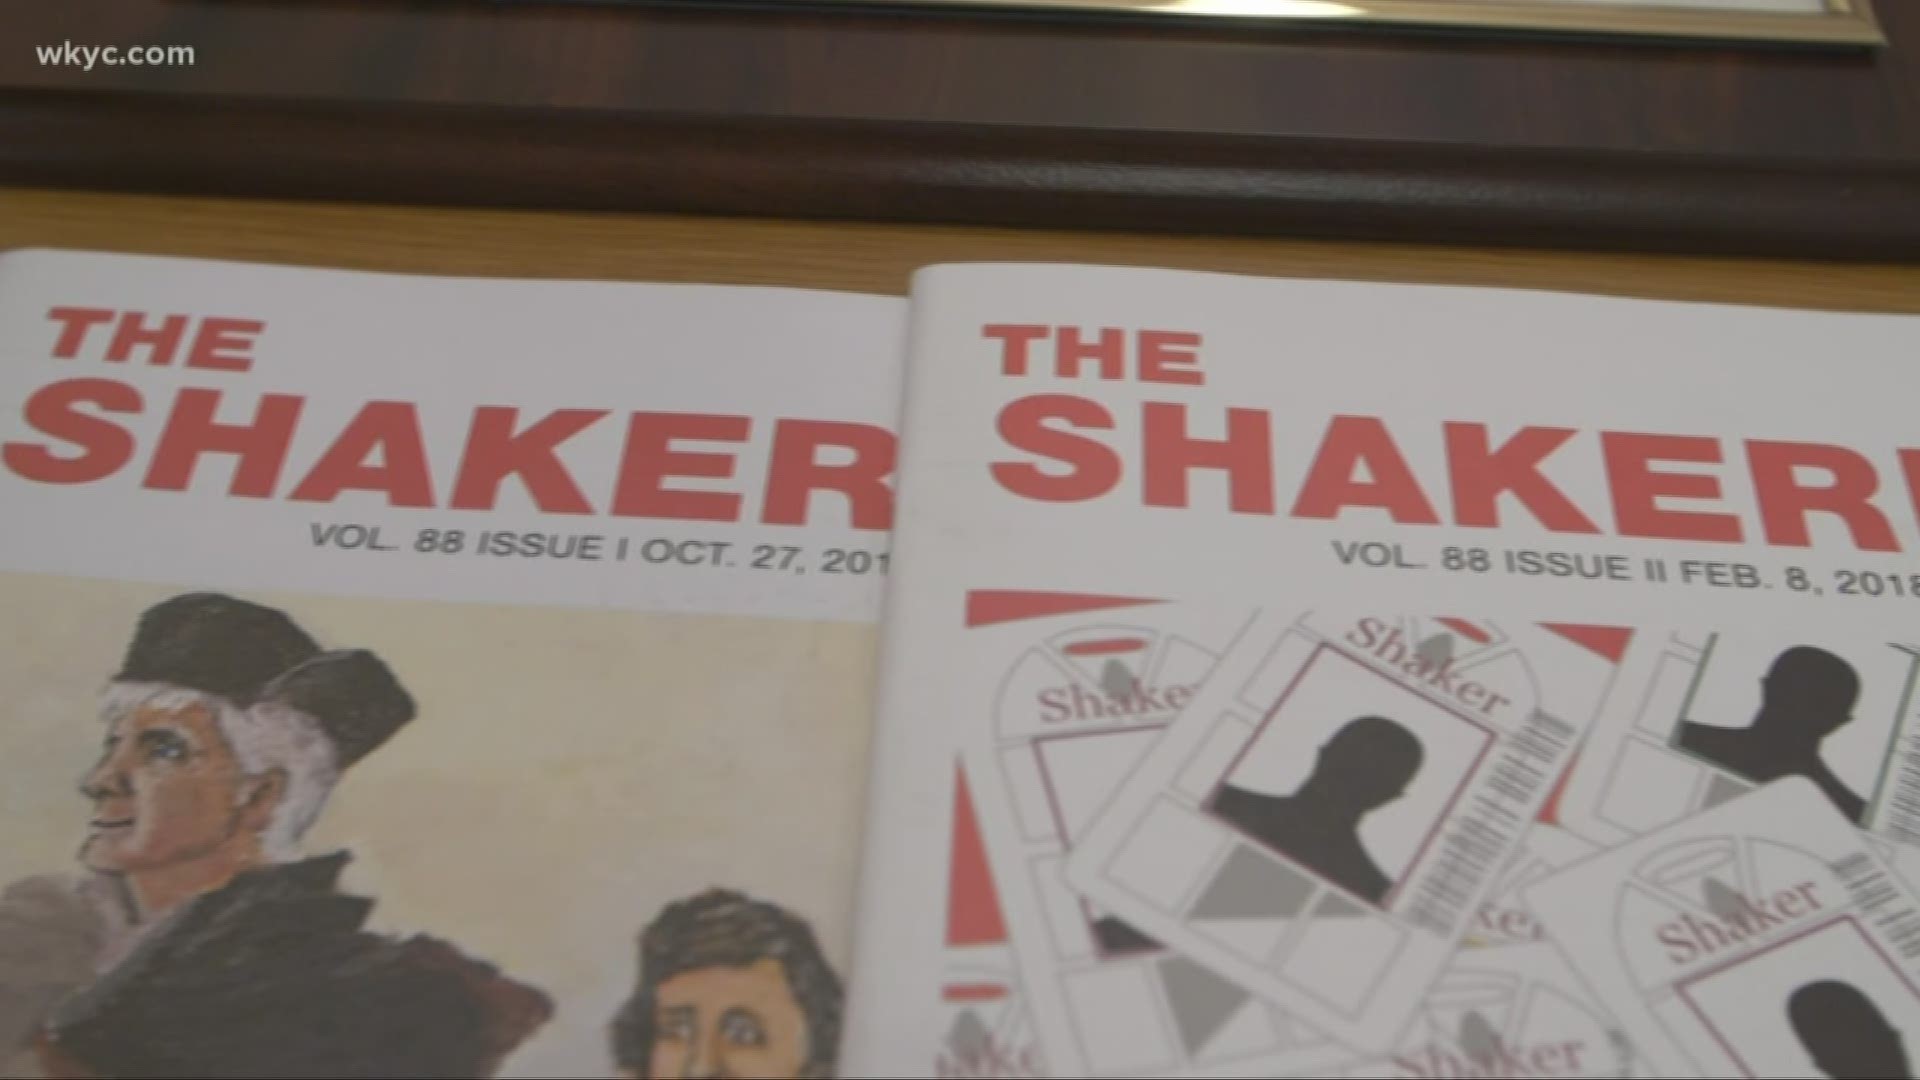 'The Shakerite' has a legacy of stand-out journalism. Russ Mitchell reports.